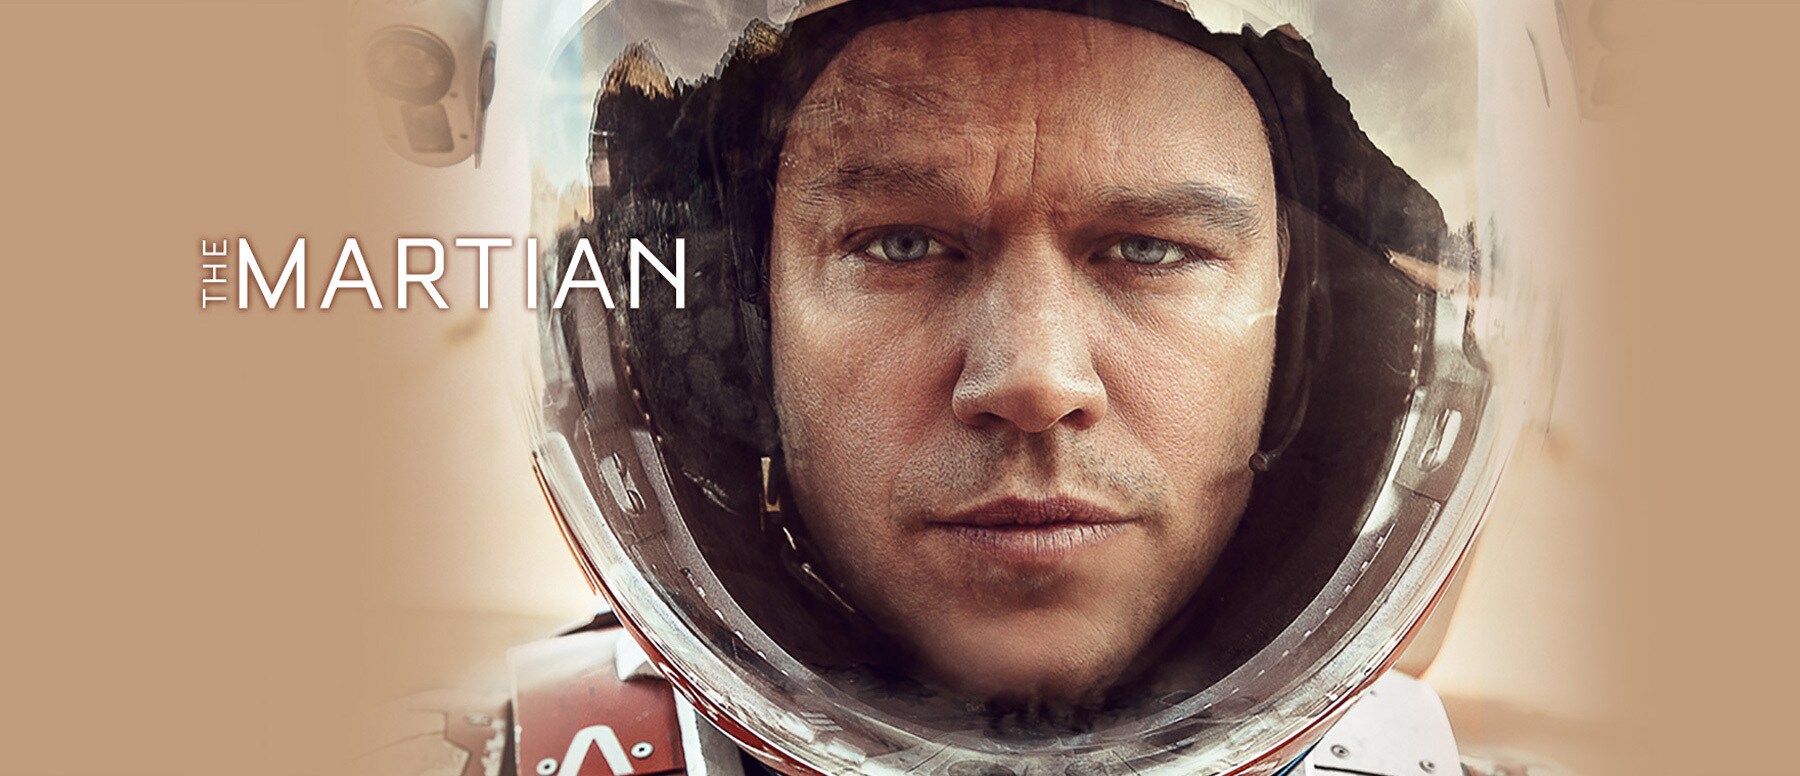 bring him home the martian full movie